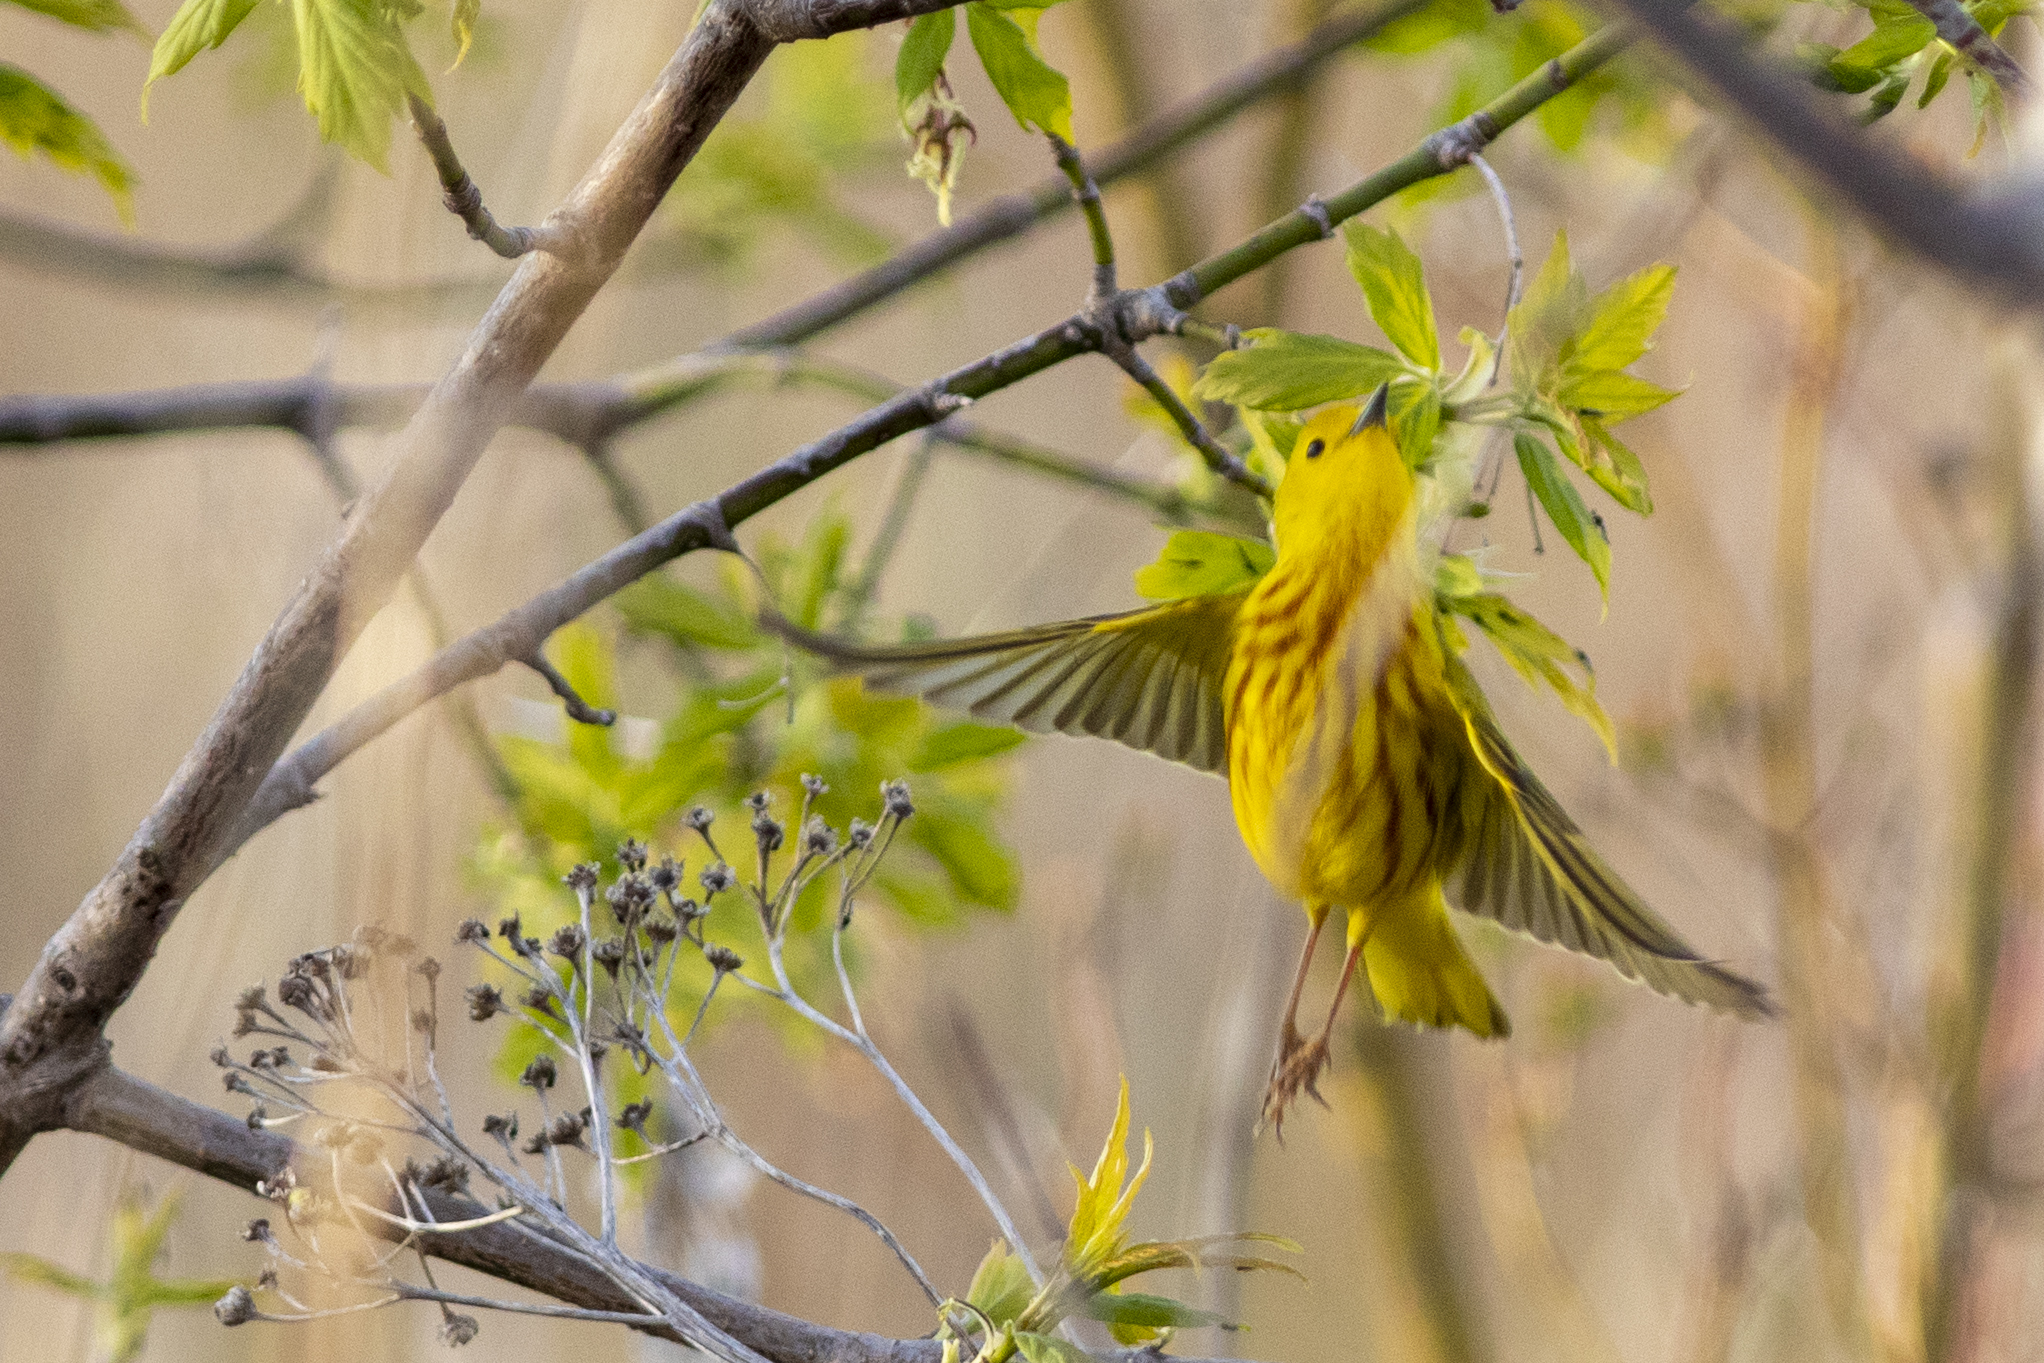 A close up of a small yellow bird with brown streaks on its belly, flying upwards past leaves and branches in  Tommy Thompson Park.